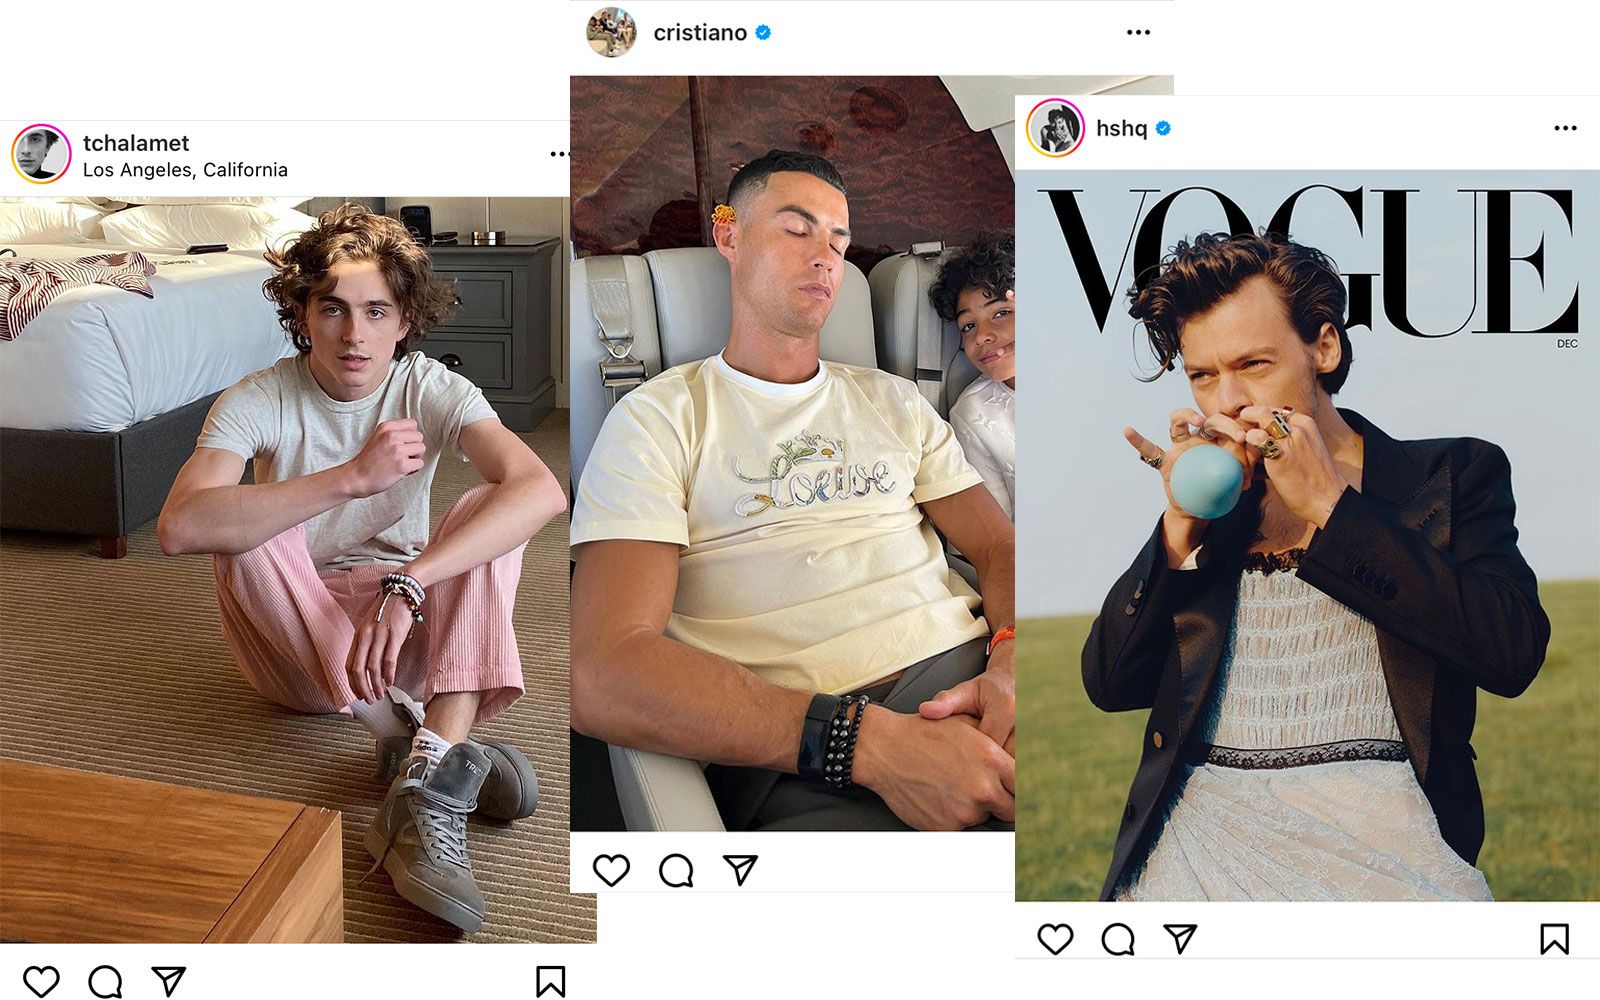 Celebrities Timothée Chalamet, Cristiano Ronaldo and Harry Styles wearing jewellery in their own unique ways